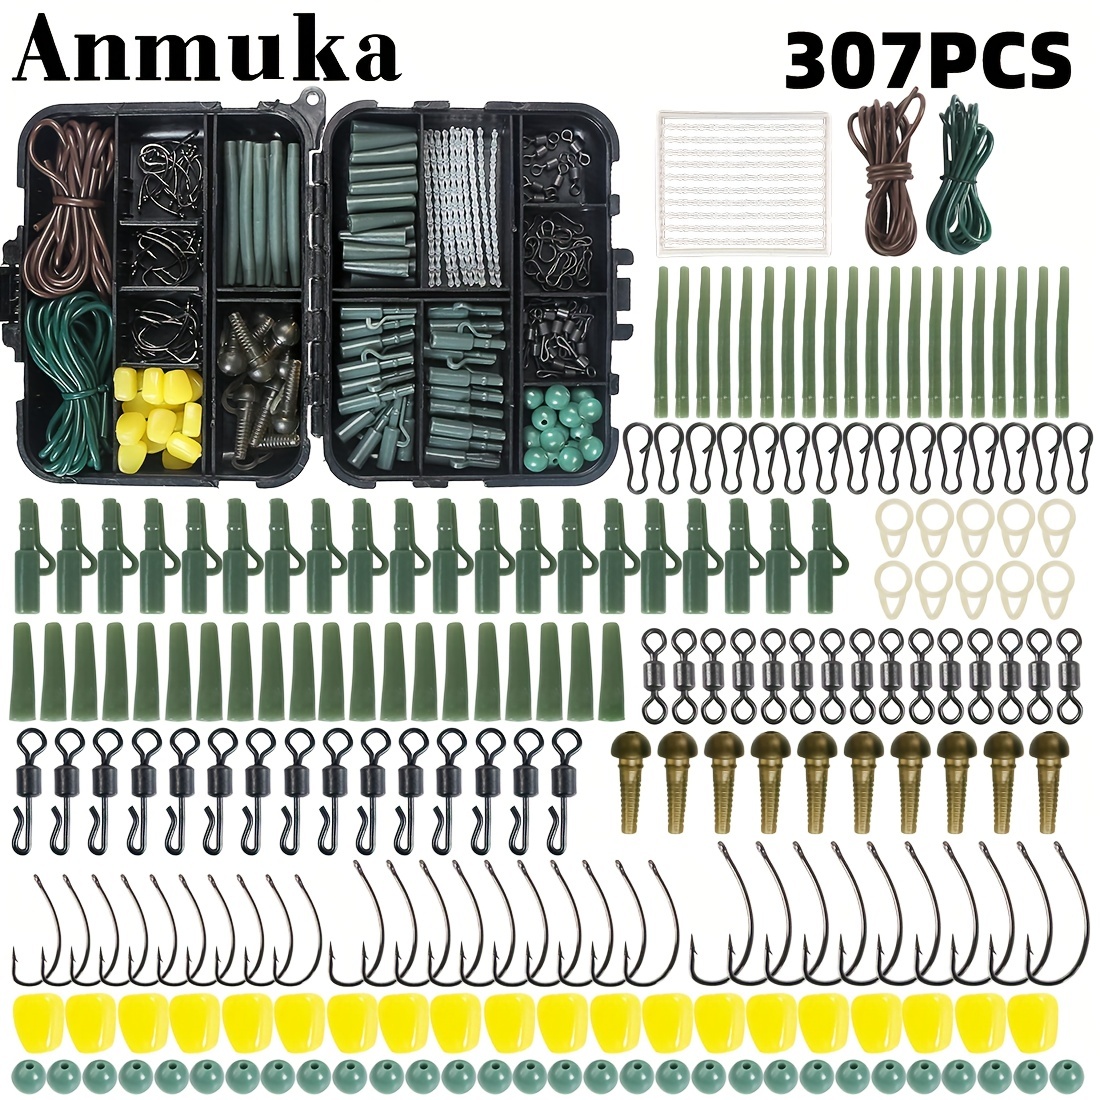 307pcs Complete Carp Fishing Tackle Kit Box with Hooks, Soft Beads, Tubes,  Clips, and Small Accessories - Everything You Need for a Successful Fishing